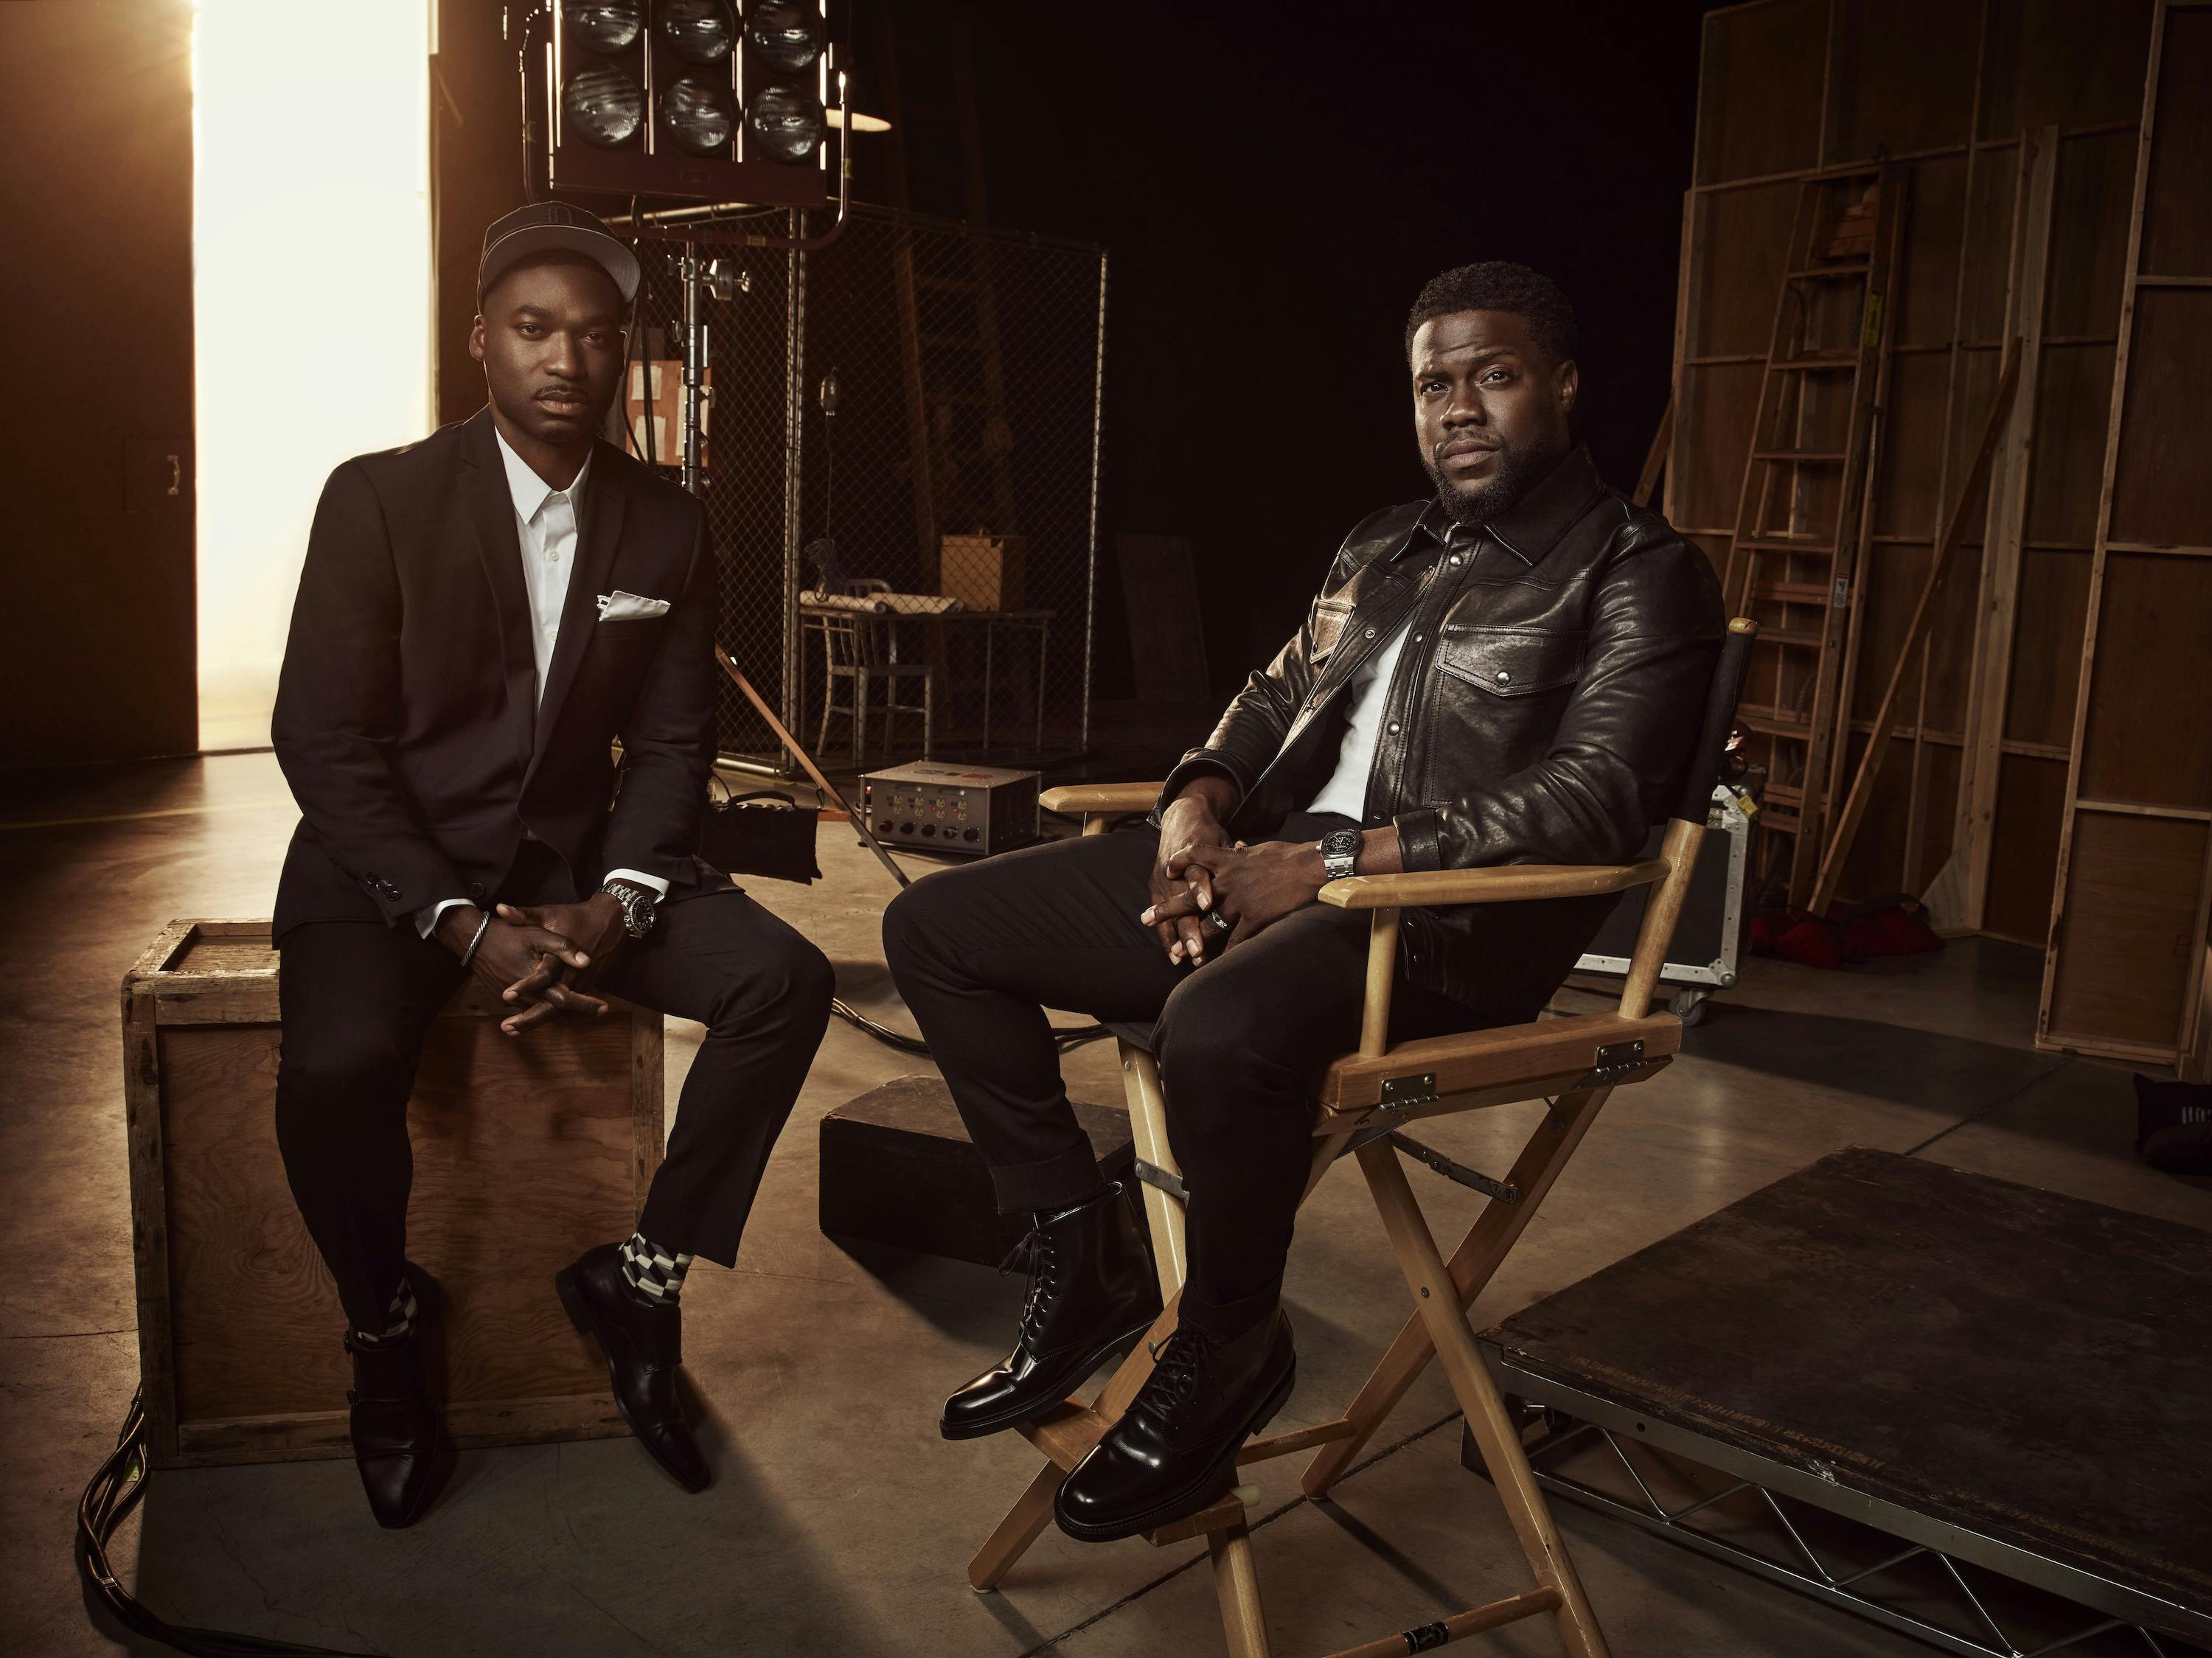 Bryan Smiley and Kevin Hart look dramatic sitting in directors chairs in a this chic sunlit shot.